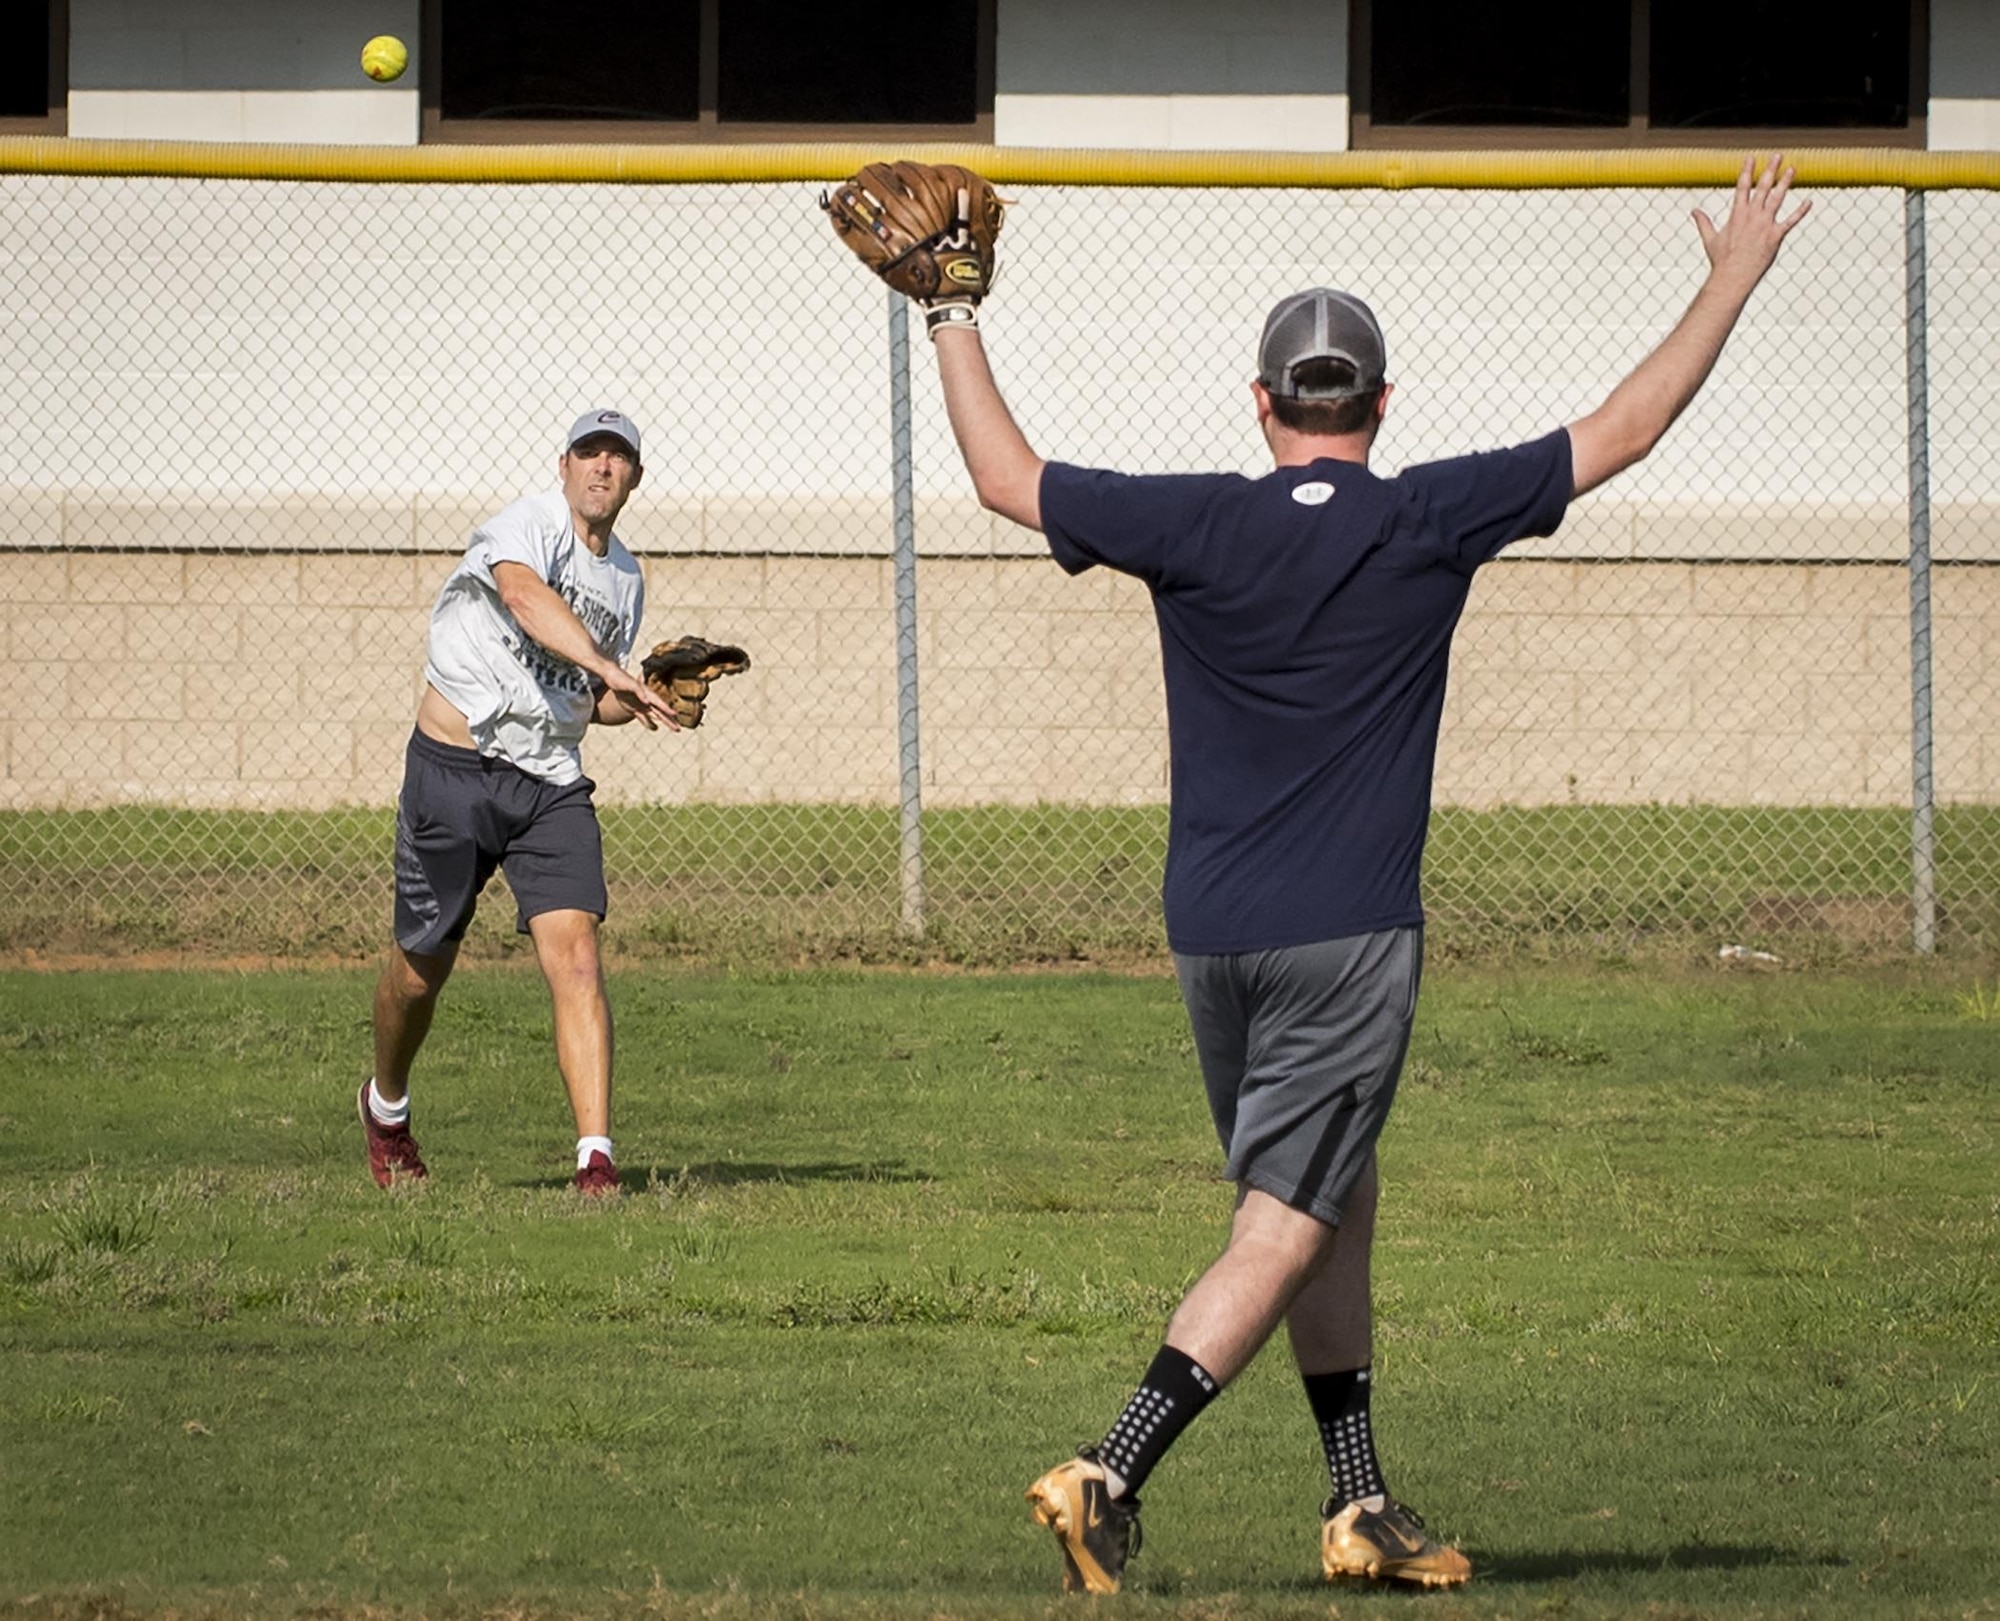 The Armament Directorate team’s outfielder throws to his cut-off man during an intramural softball game at Eglin Air Force Base, Fla., June 8.  The EB team bashed the hapless Air Force Research Lab team 14-4 in five innings of play.  (U.S. Air Force photo/Samuel King Jr.)